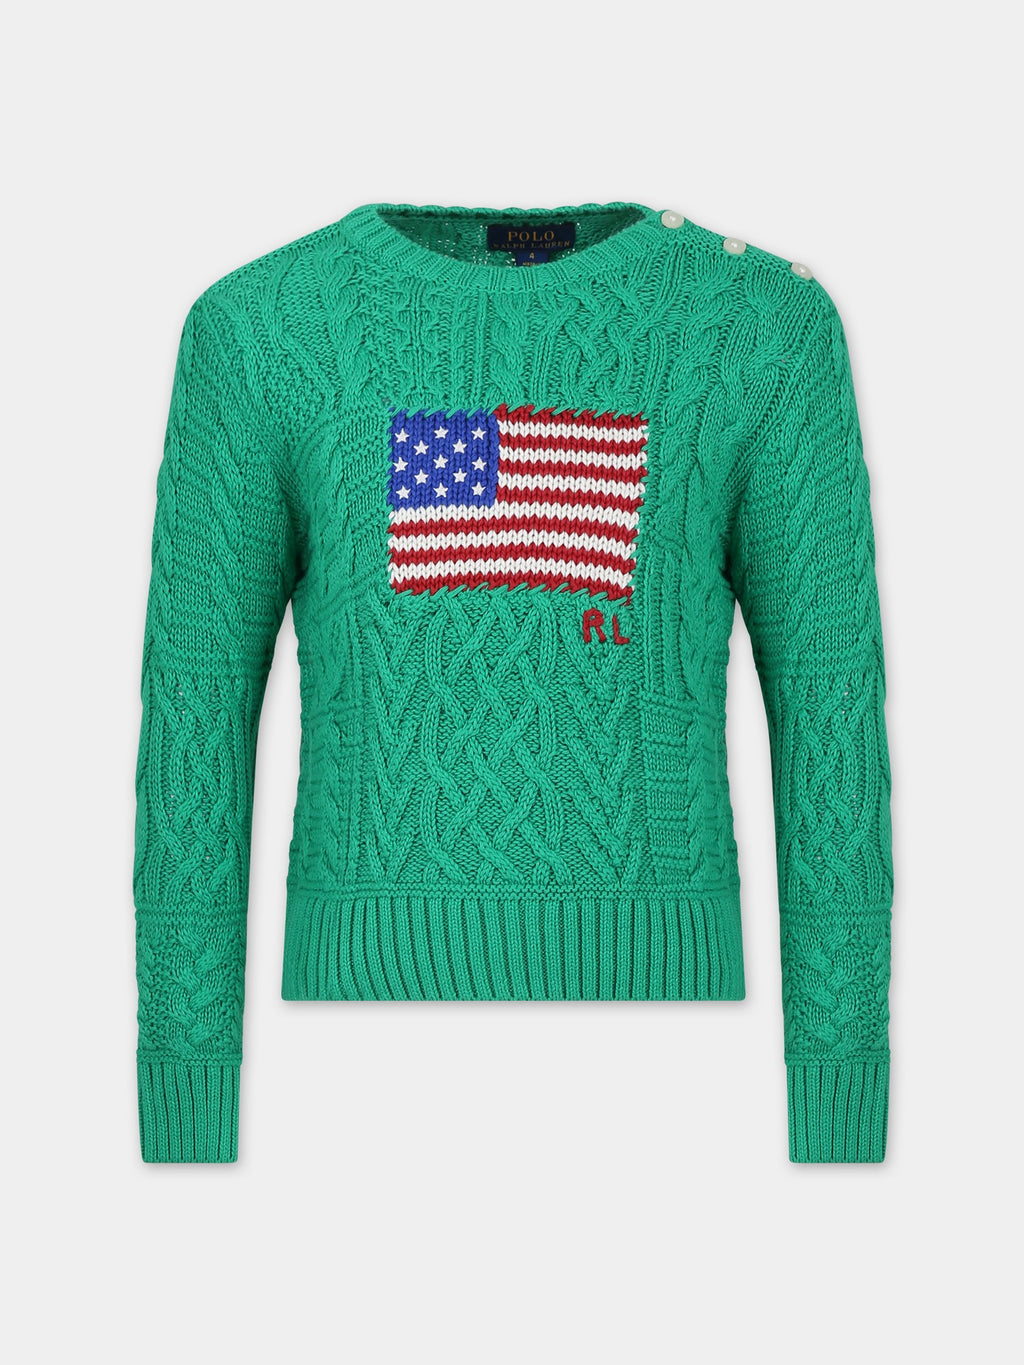 Green sweater for girl with iconic flag